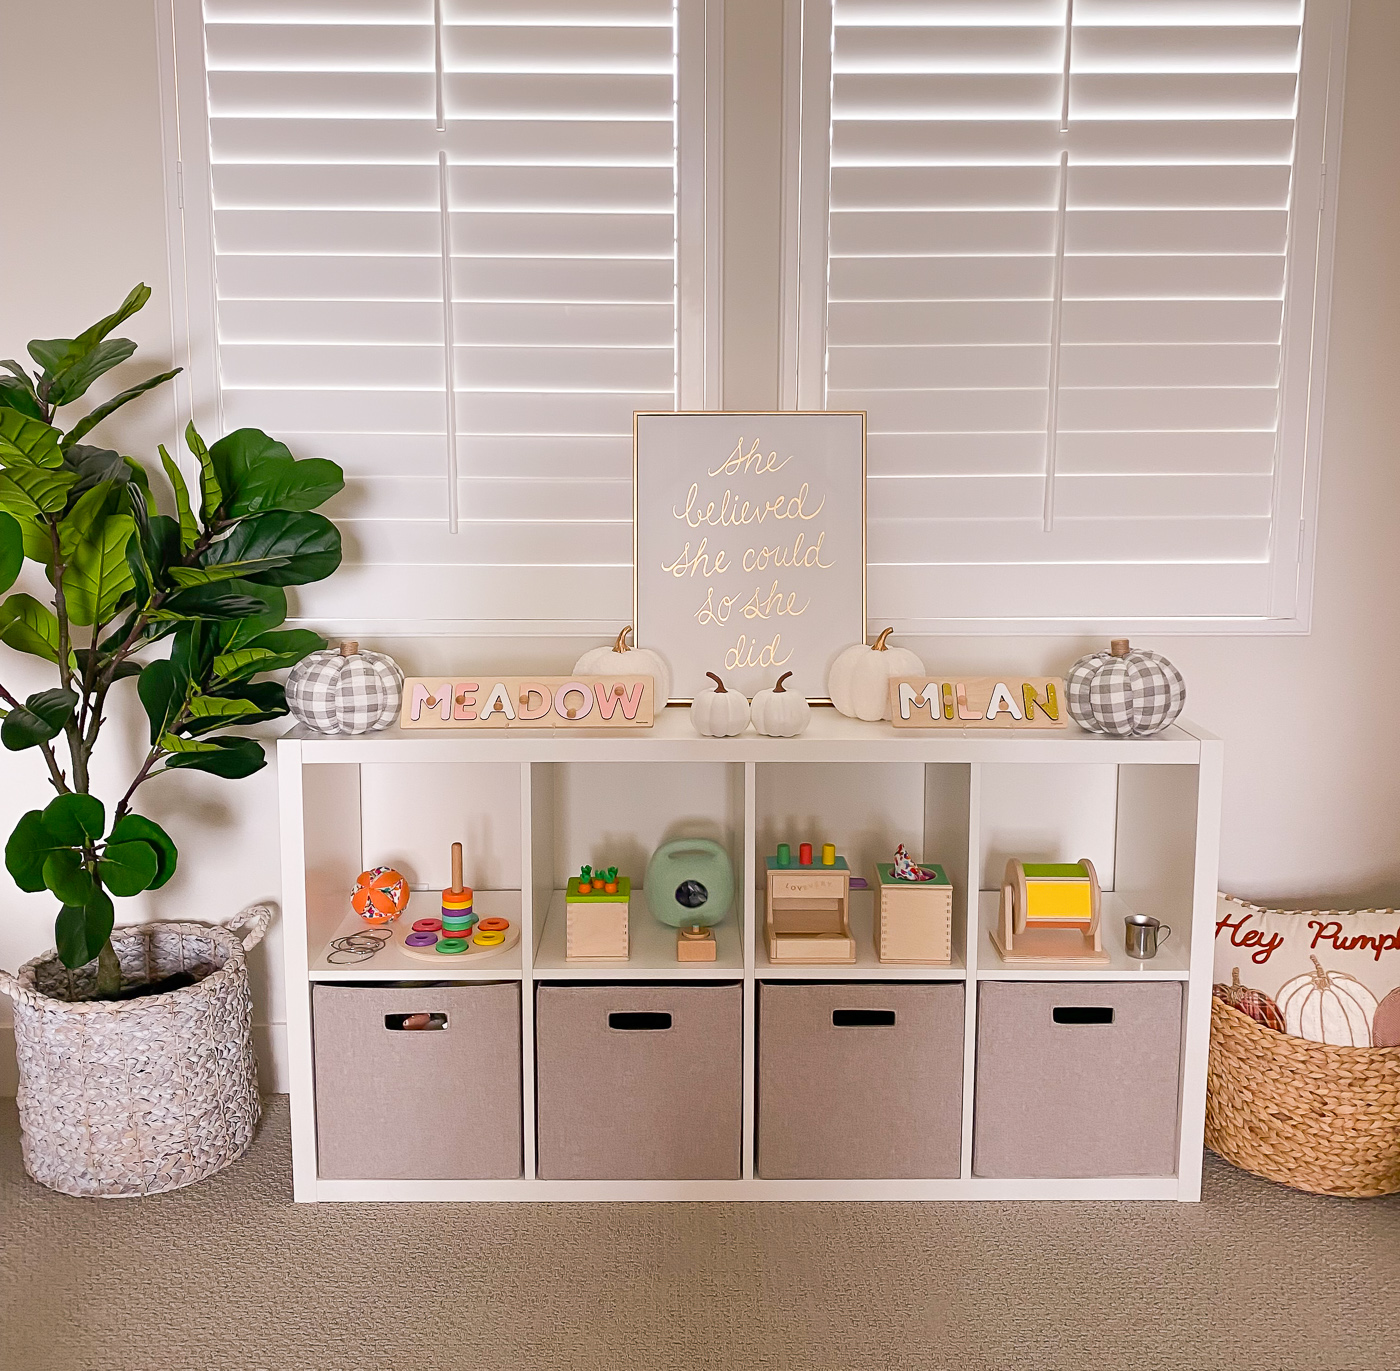 How To Organize Kids Toys On A Budget - Stylish Petite